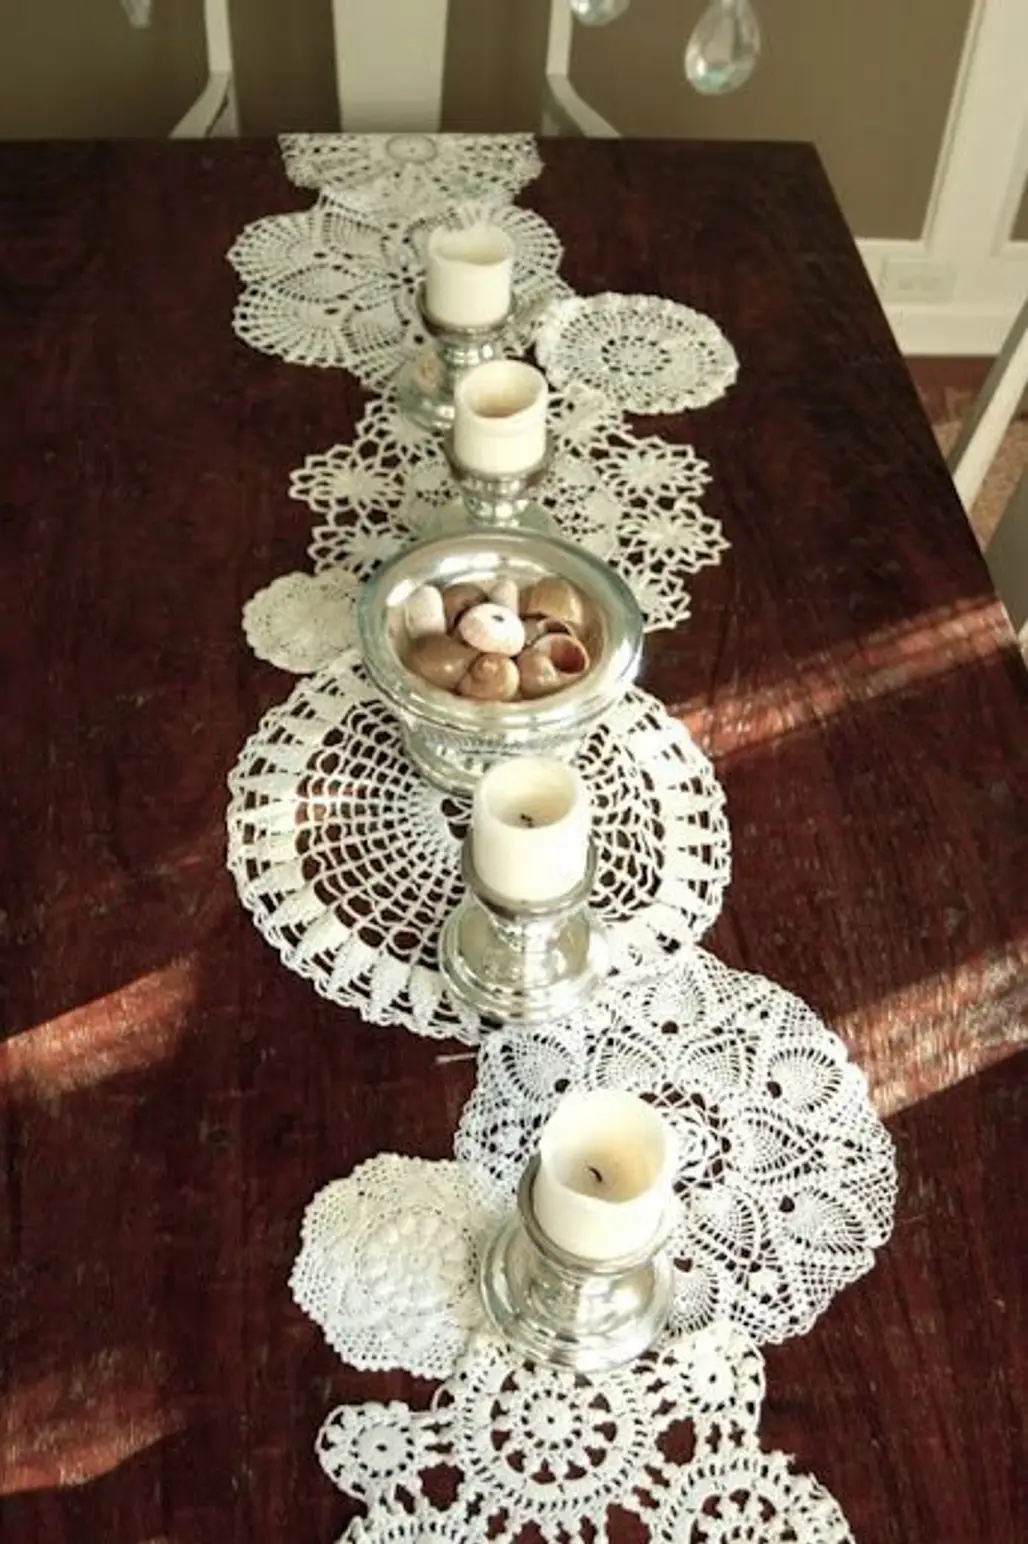 Sew Doilies Together for a Table Runner